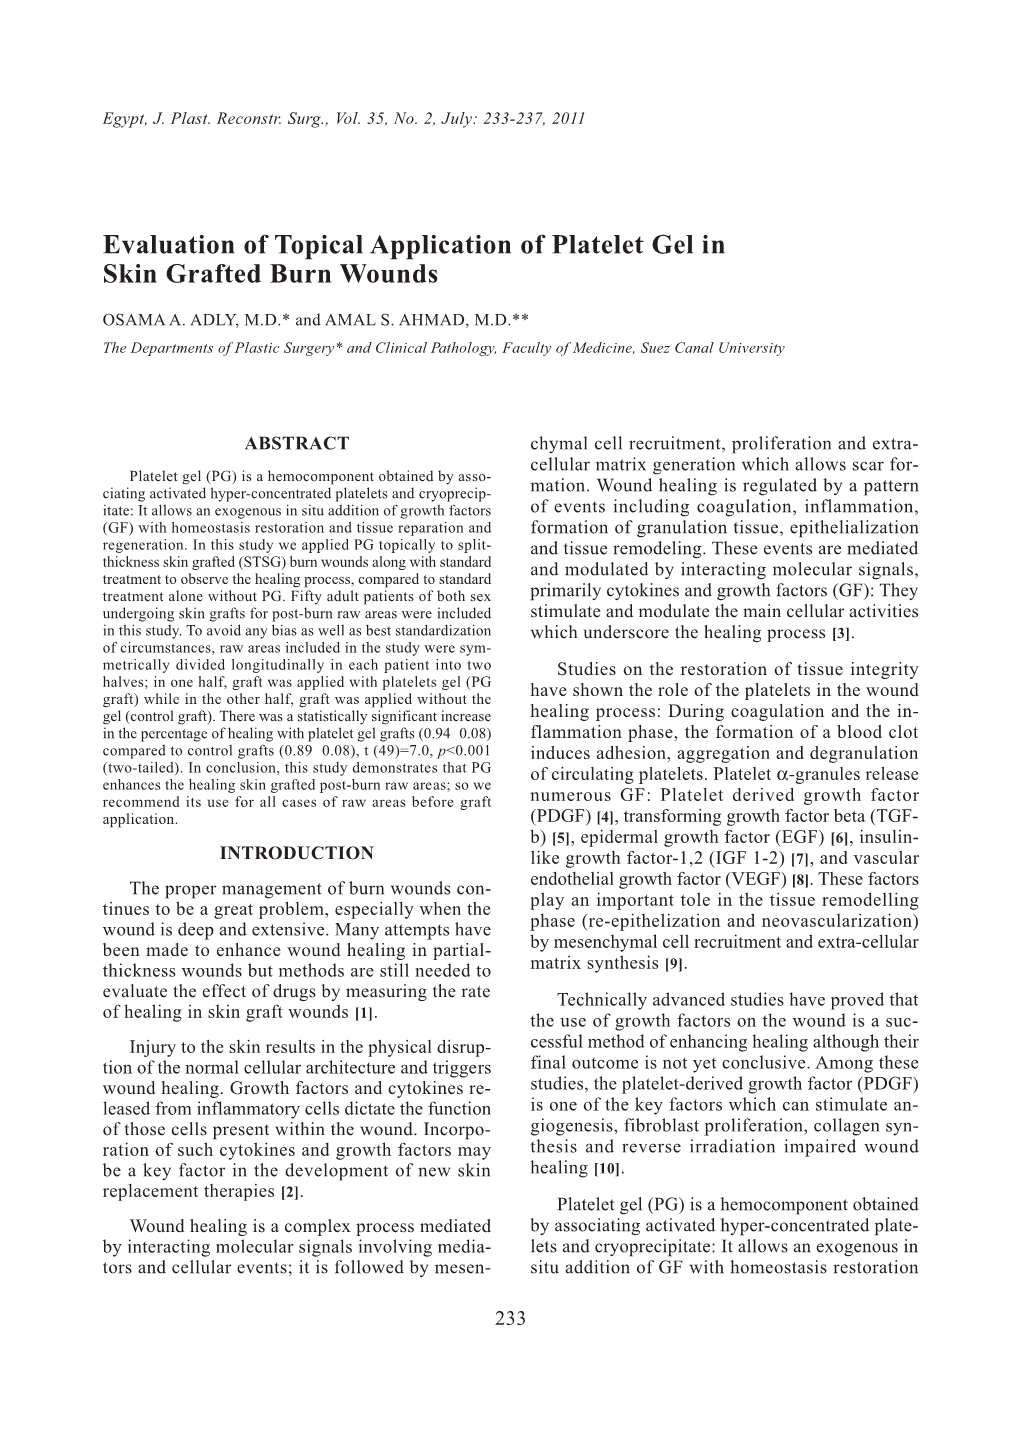 Evaluation of Topical Application of Platelet Gel in Skin Grafted Burn Wounds